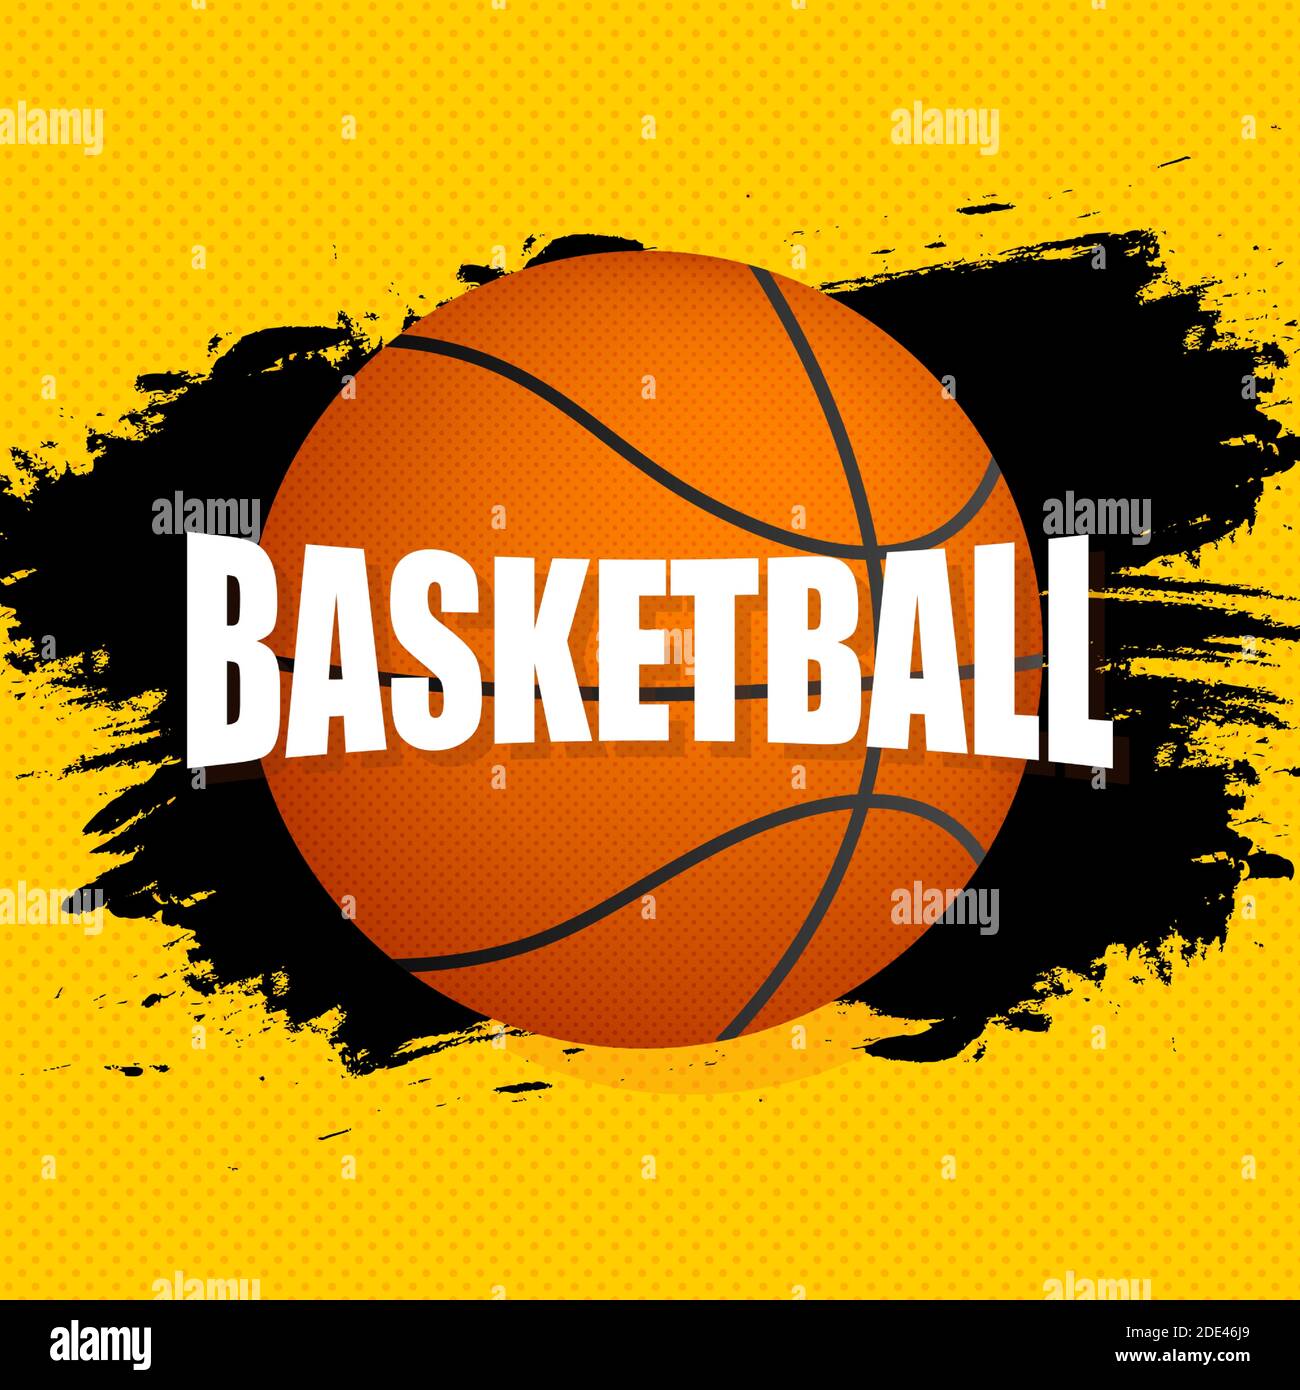 Banner template for a basketball game. Vector stock illustration. Stock Vector